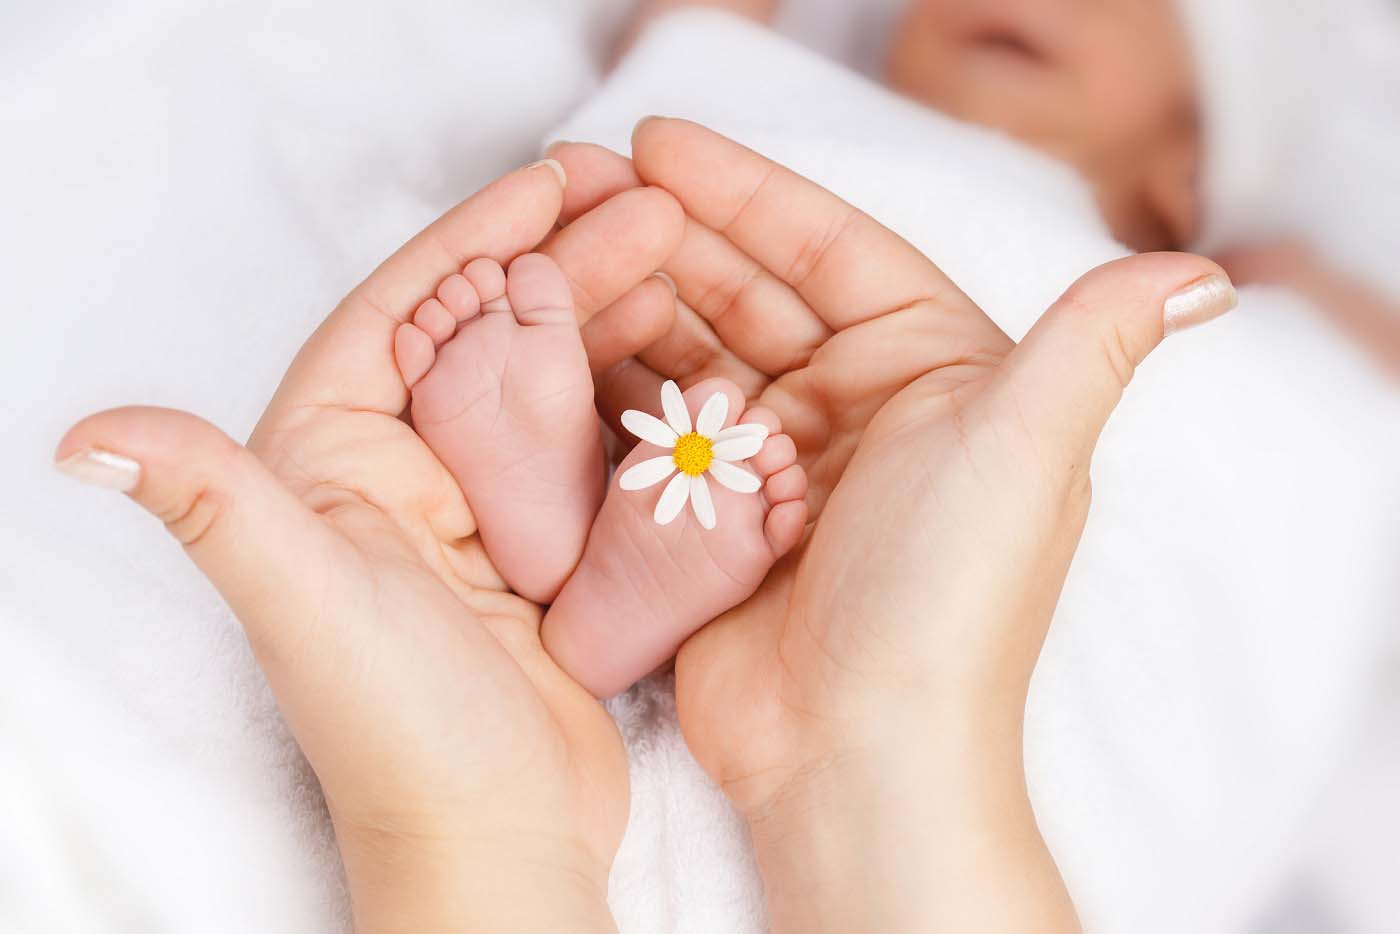 Lovely infant foot with little white daisy in mothers hands